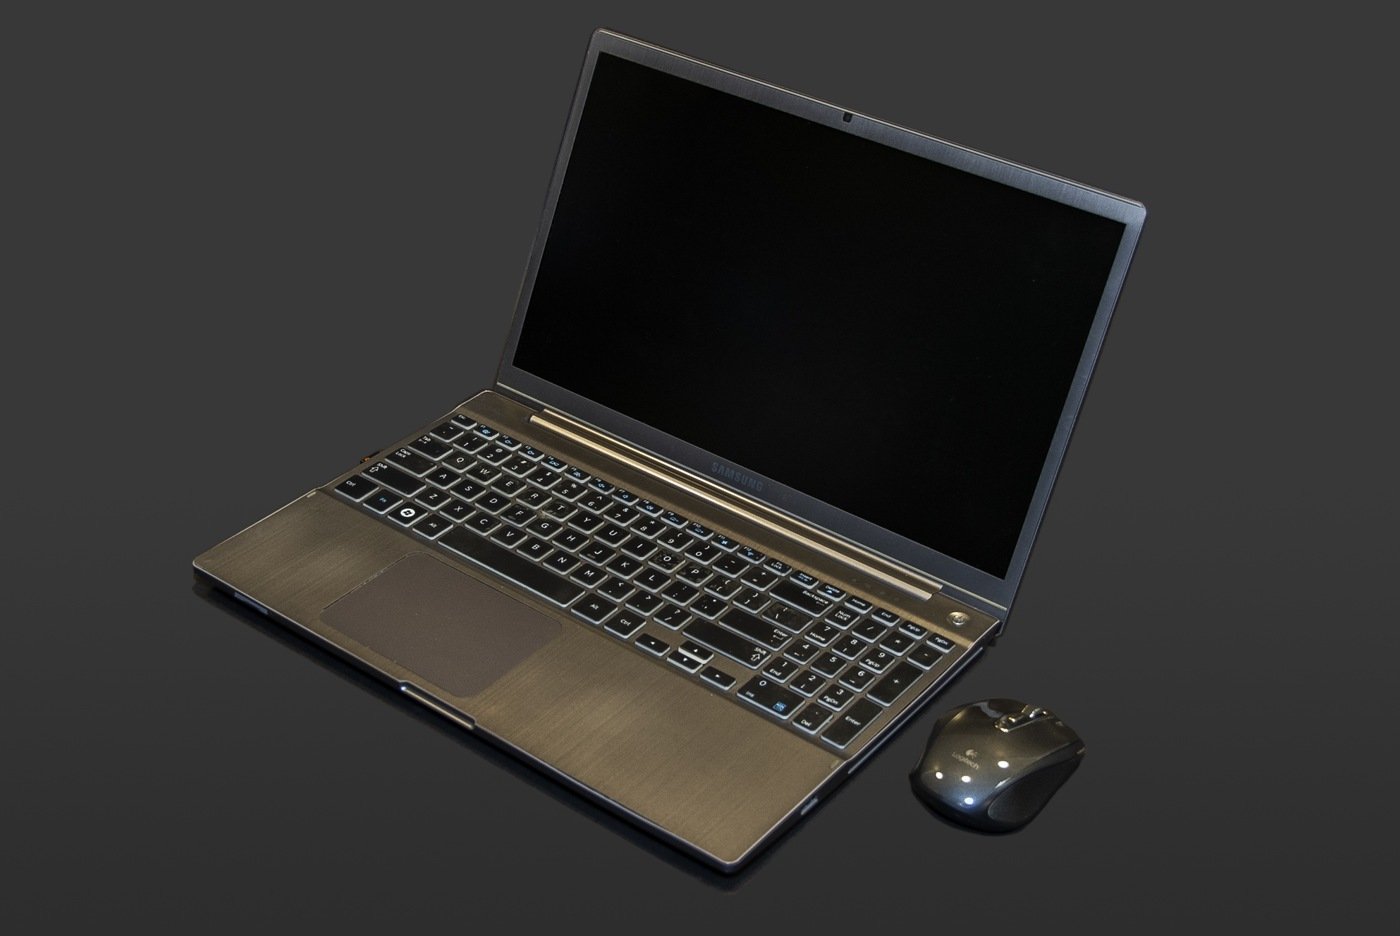 Photo of a laptop and mouse that belonged to cybercriminal Ross William Ulbricht, who ran the Silk Road darknet market from 2011 to 2013.